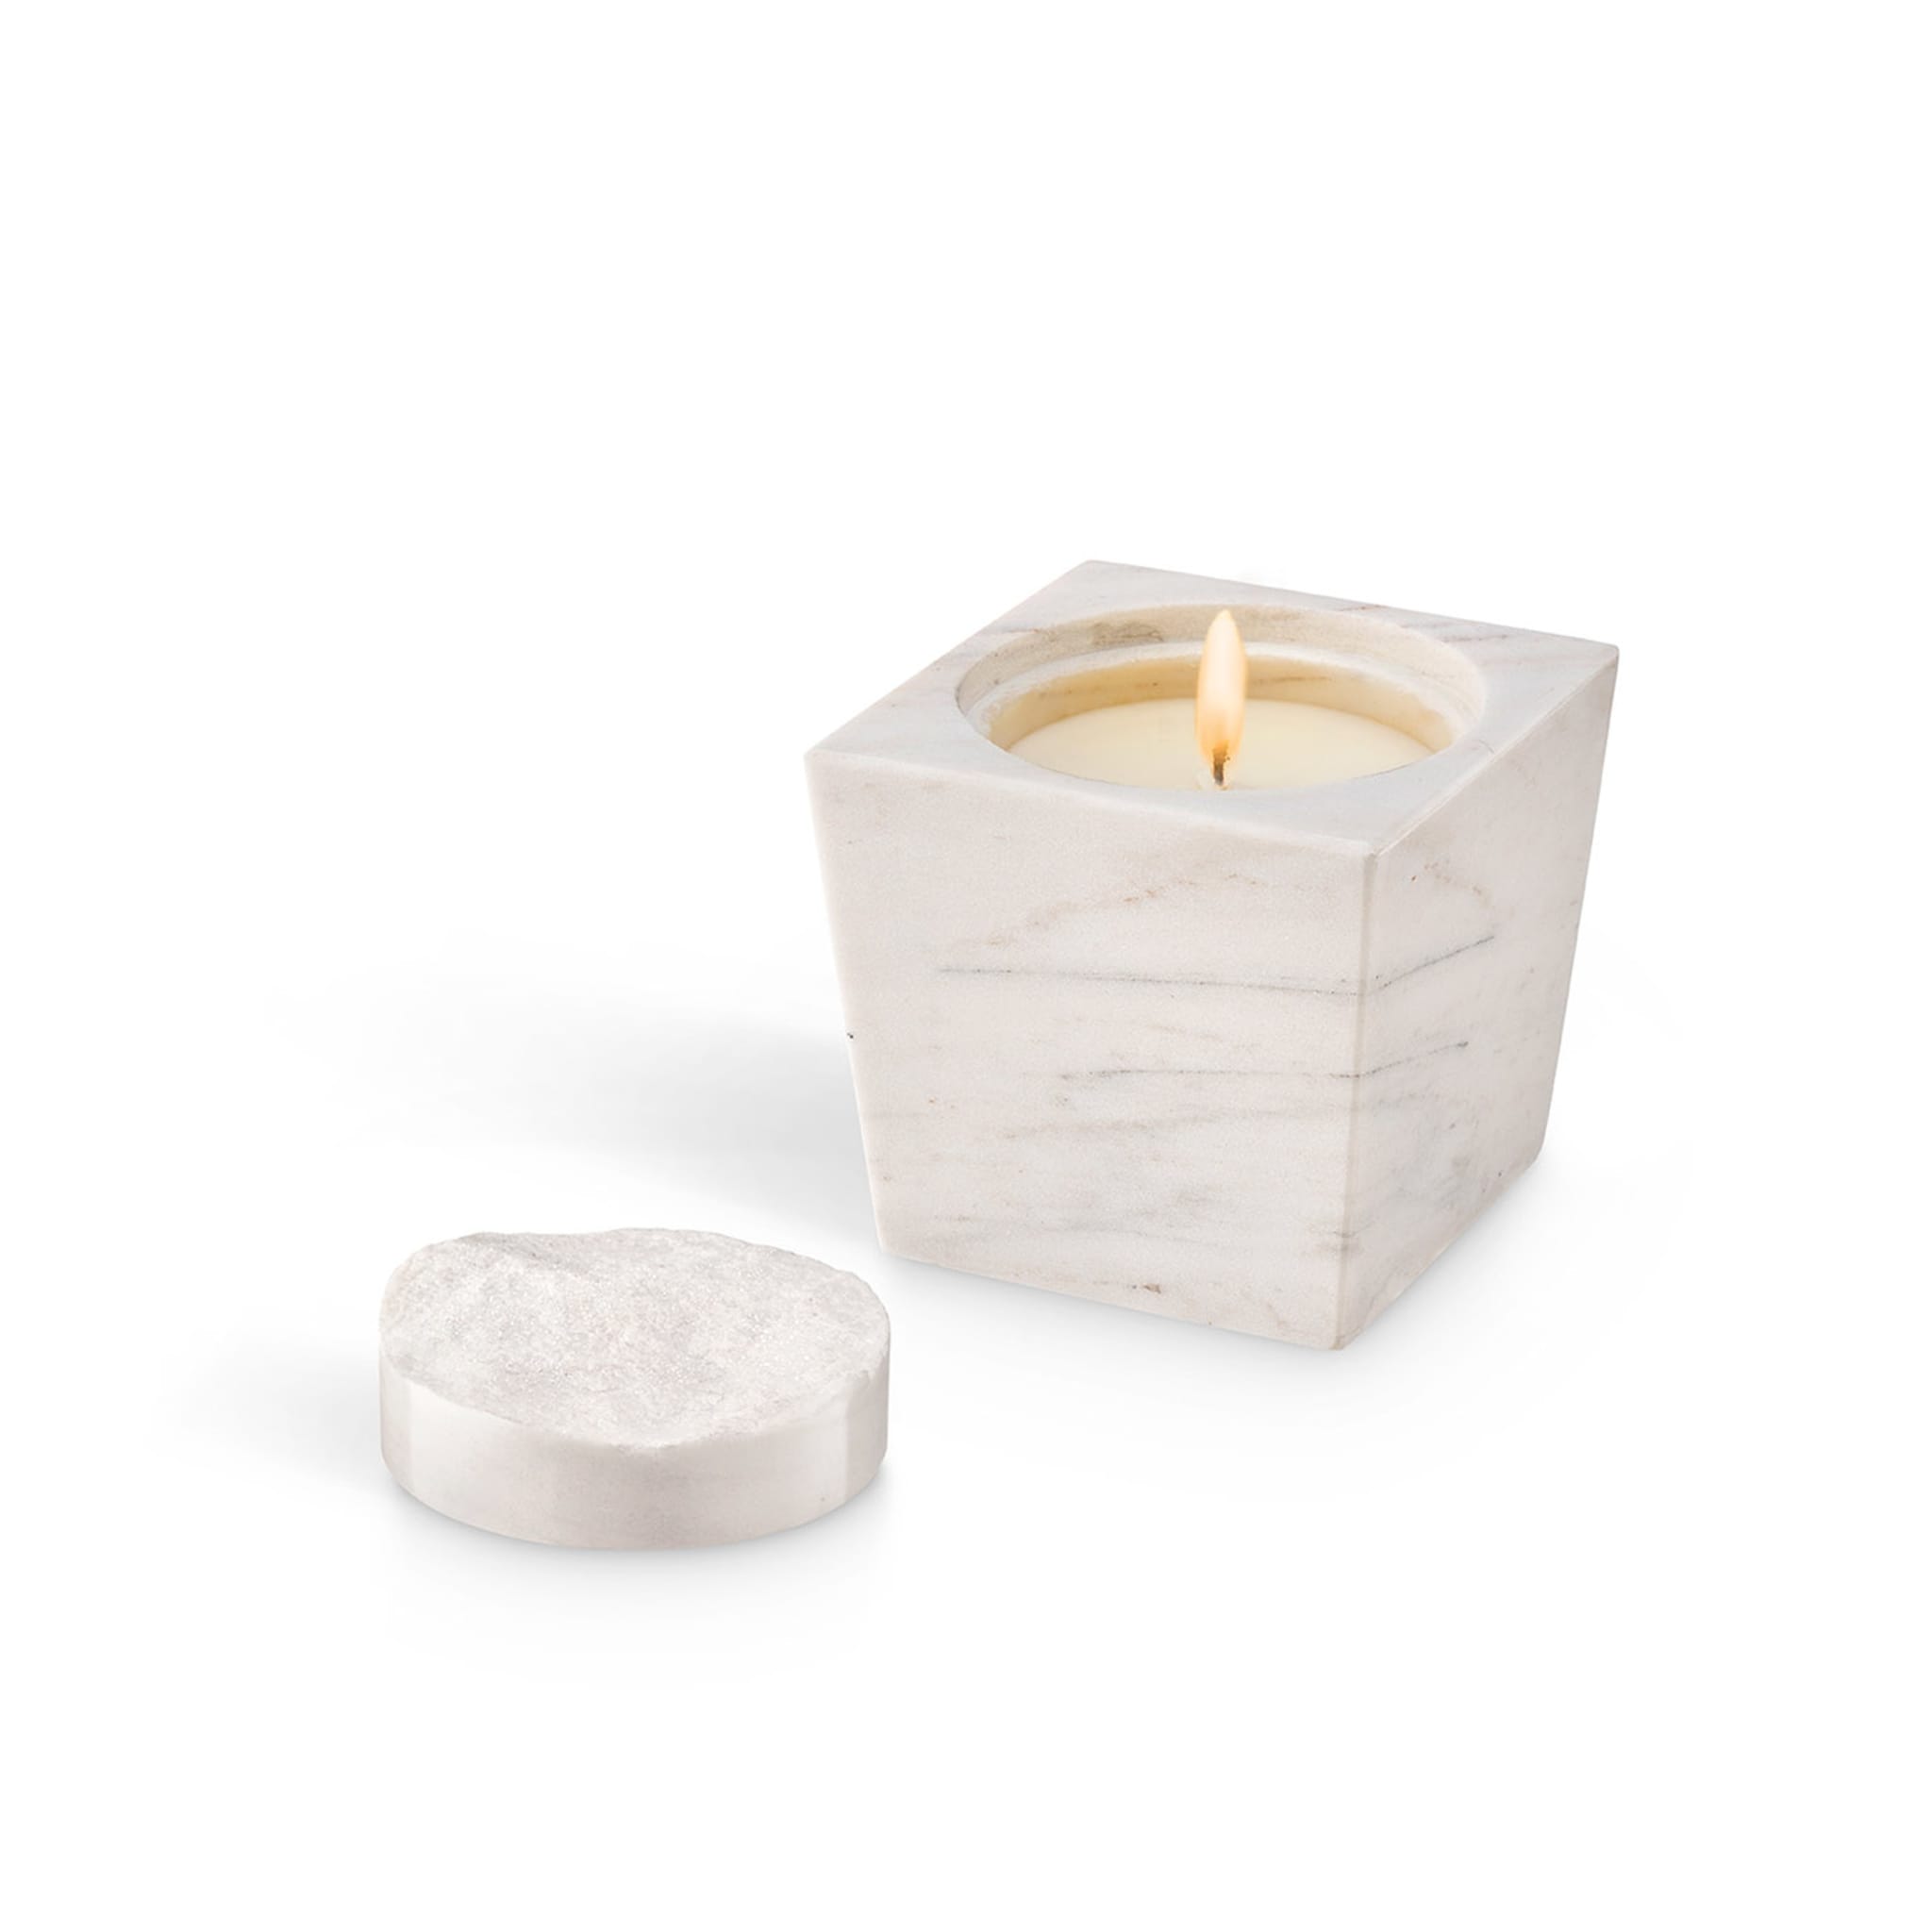 Giove Candle - Alternative view 2